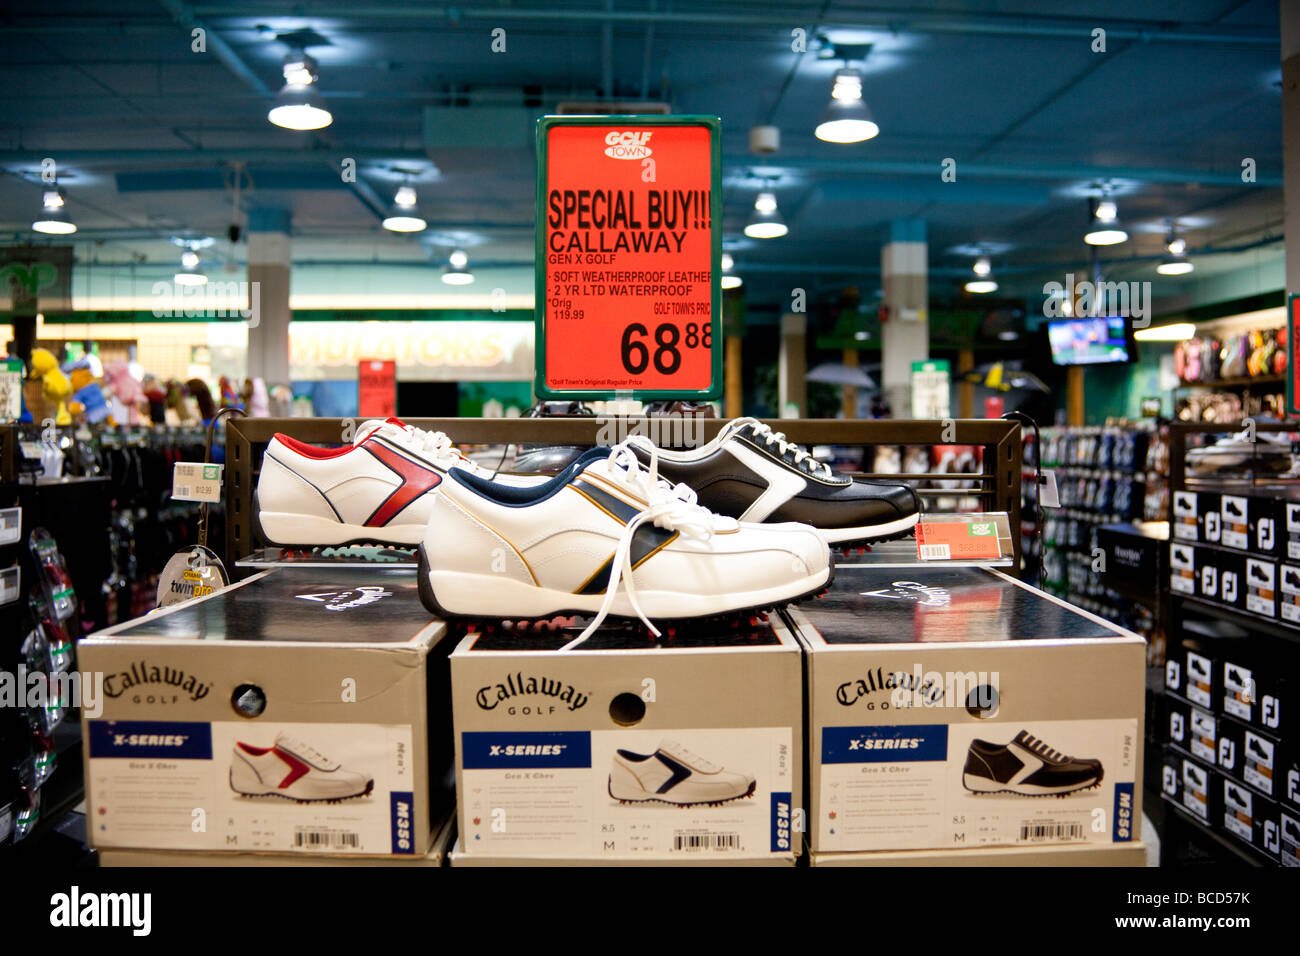 golf shoes display, Golf Town 